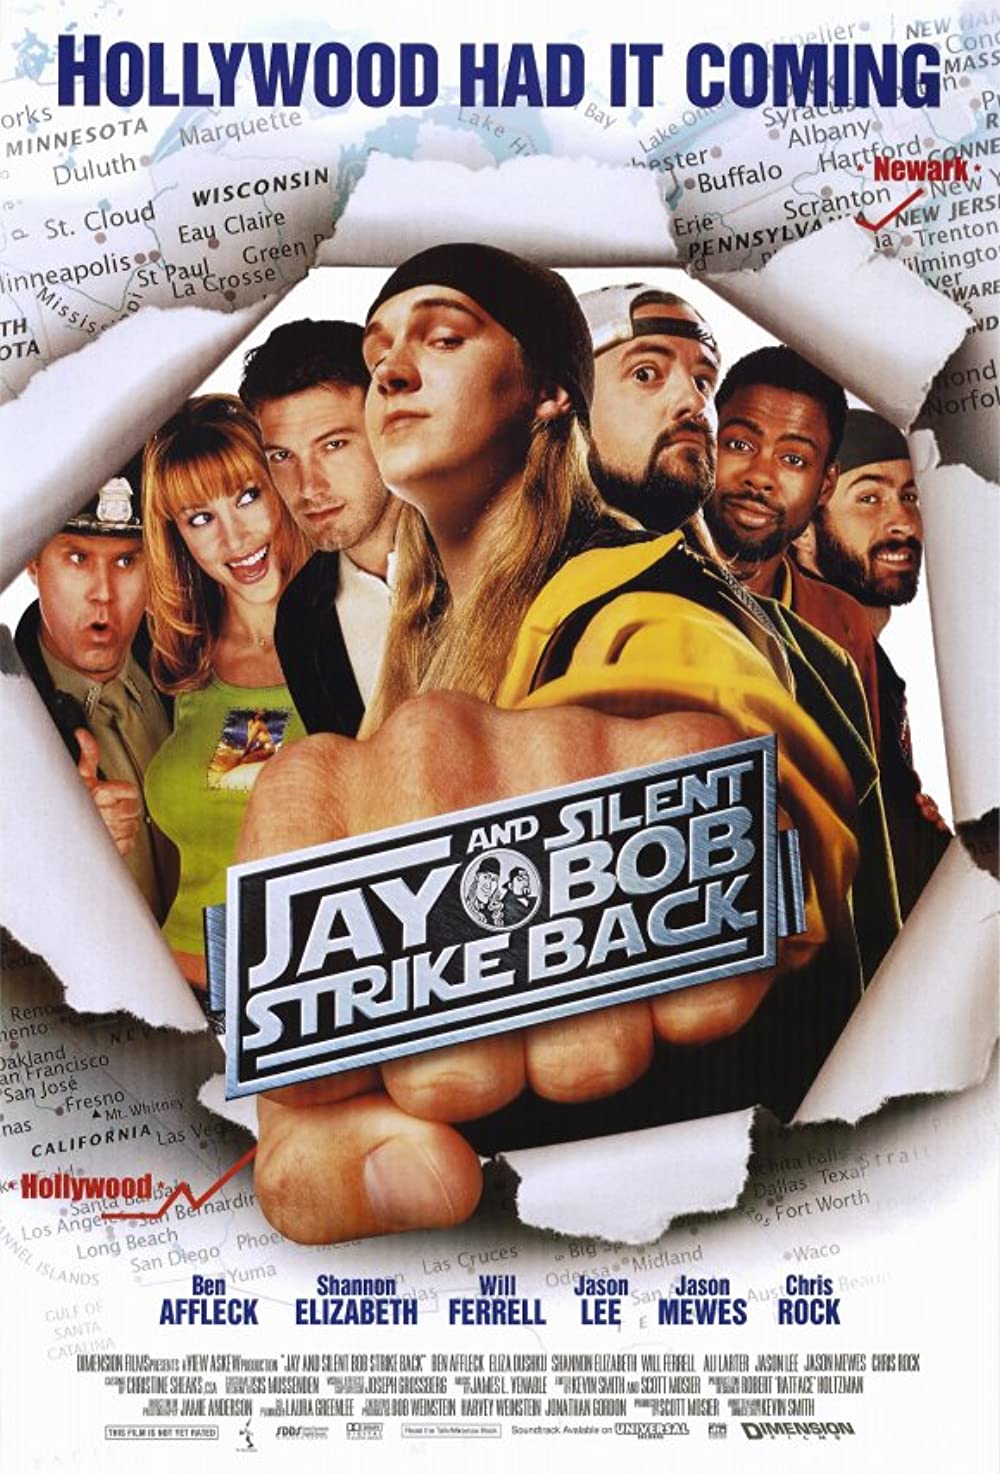 Best buddies Jay and Silent Bob discover that a movie is being made based on their likenesses. When they don't get paid for the project, they set out to sabotage the flick at all costs.